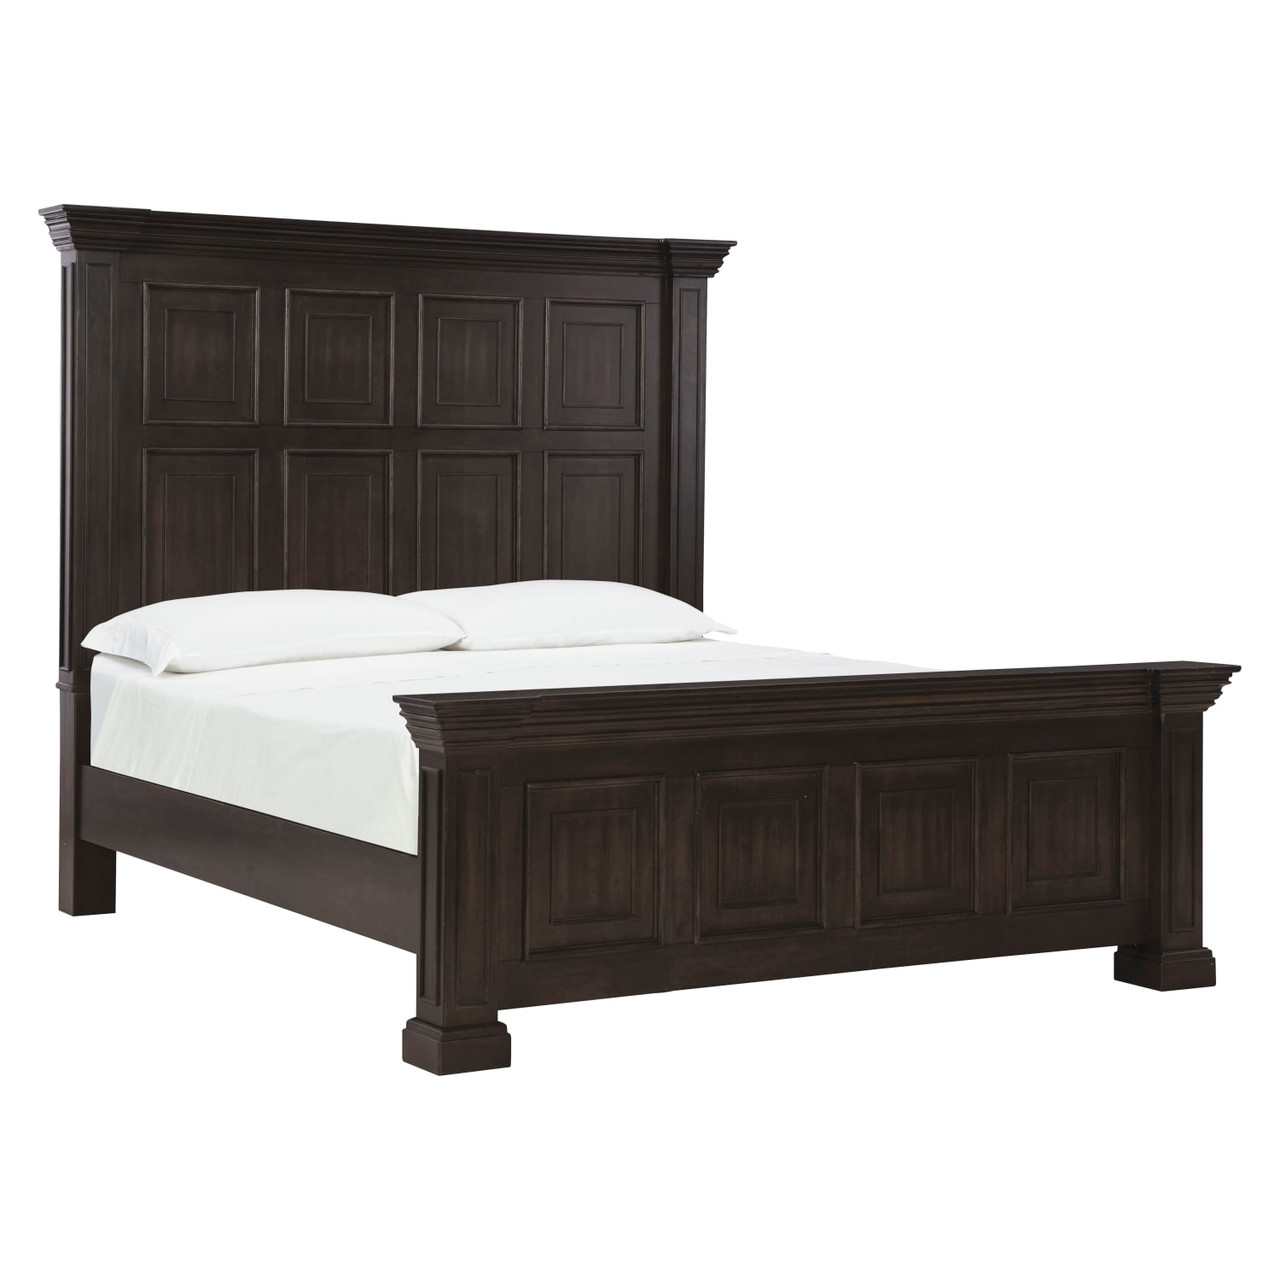 Summit Collection 3pc King Bedroom Set